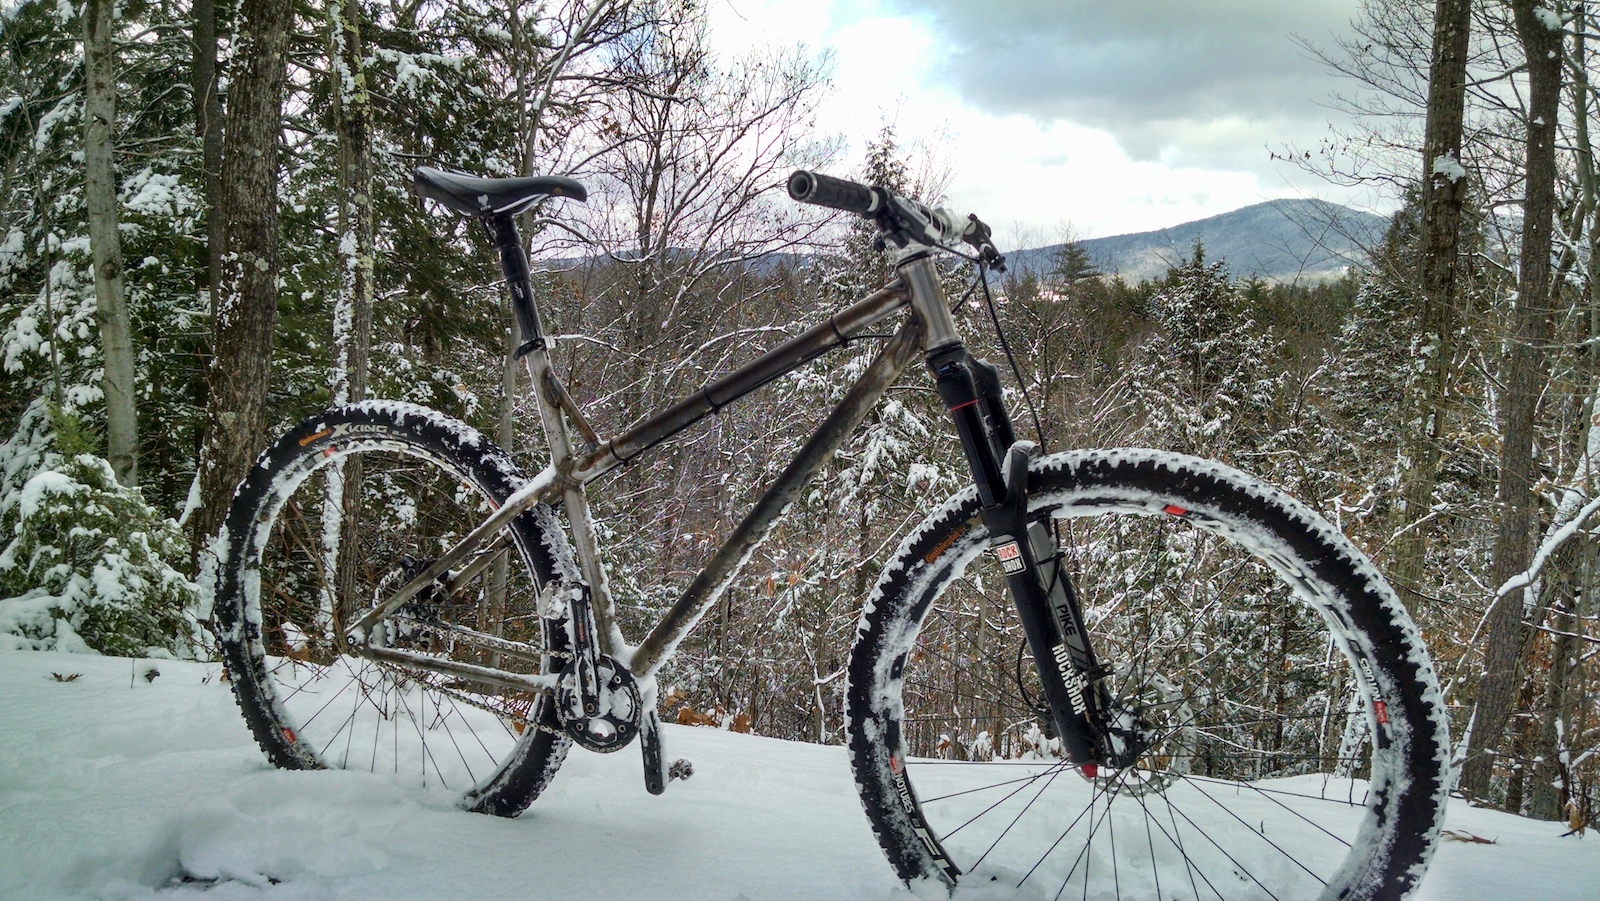 hardtail out playing in the snow!